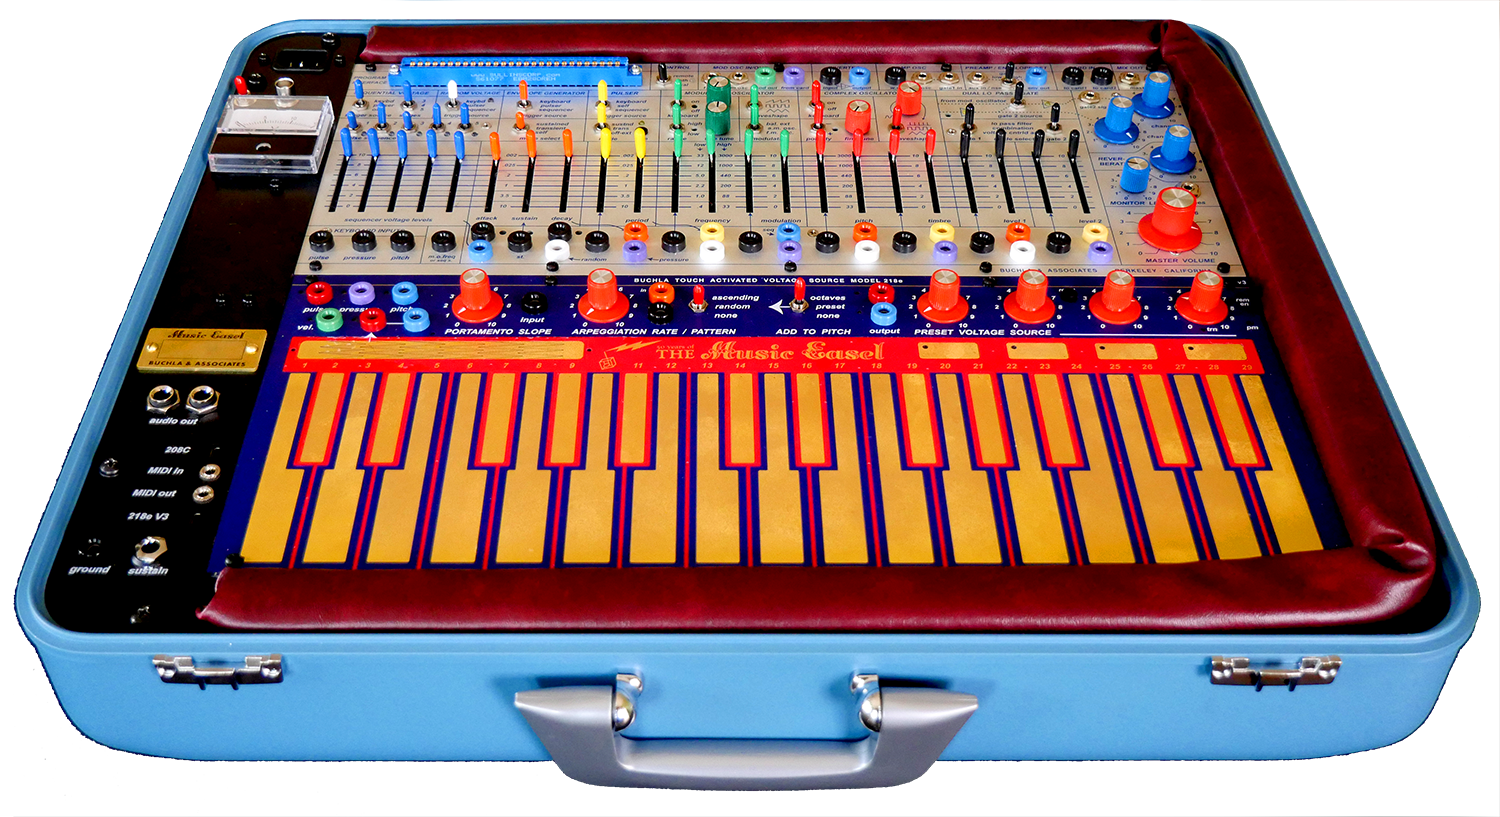 buchla-music-easel-5689373.png